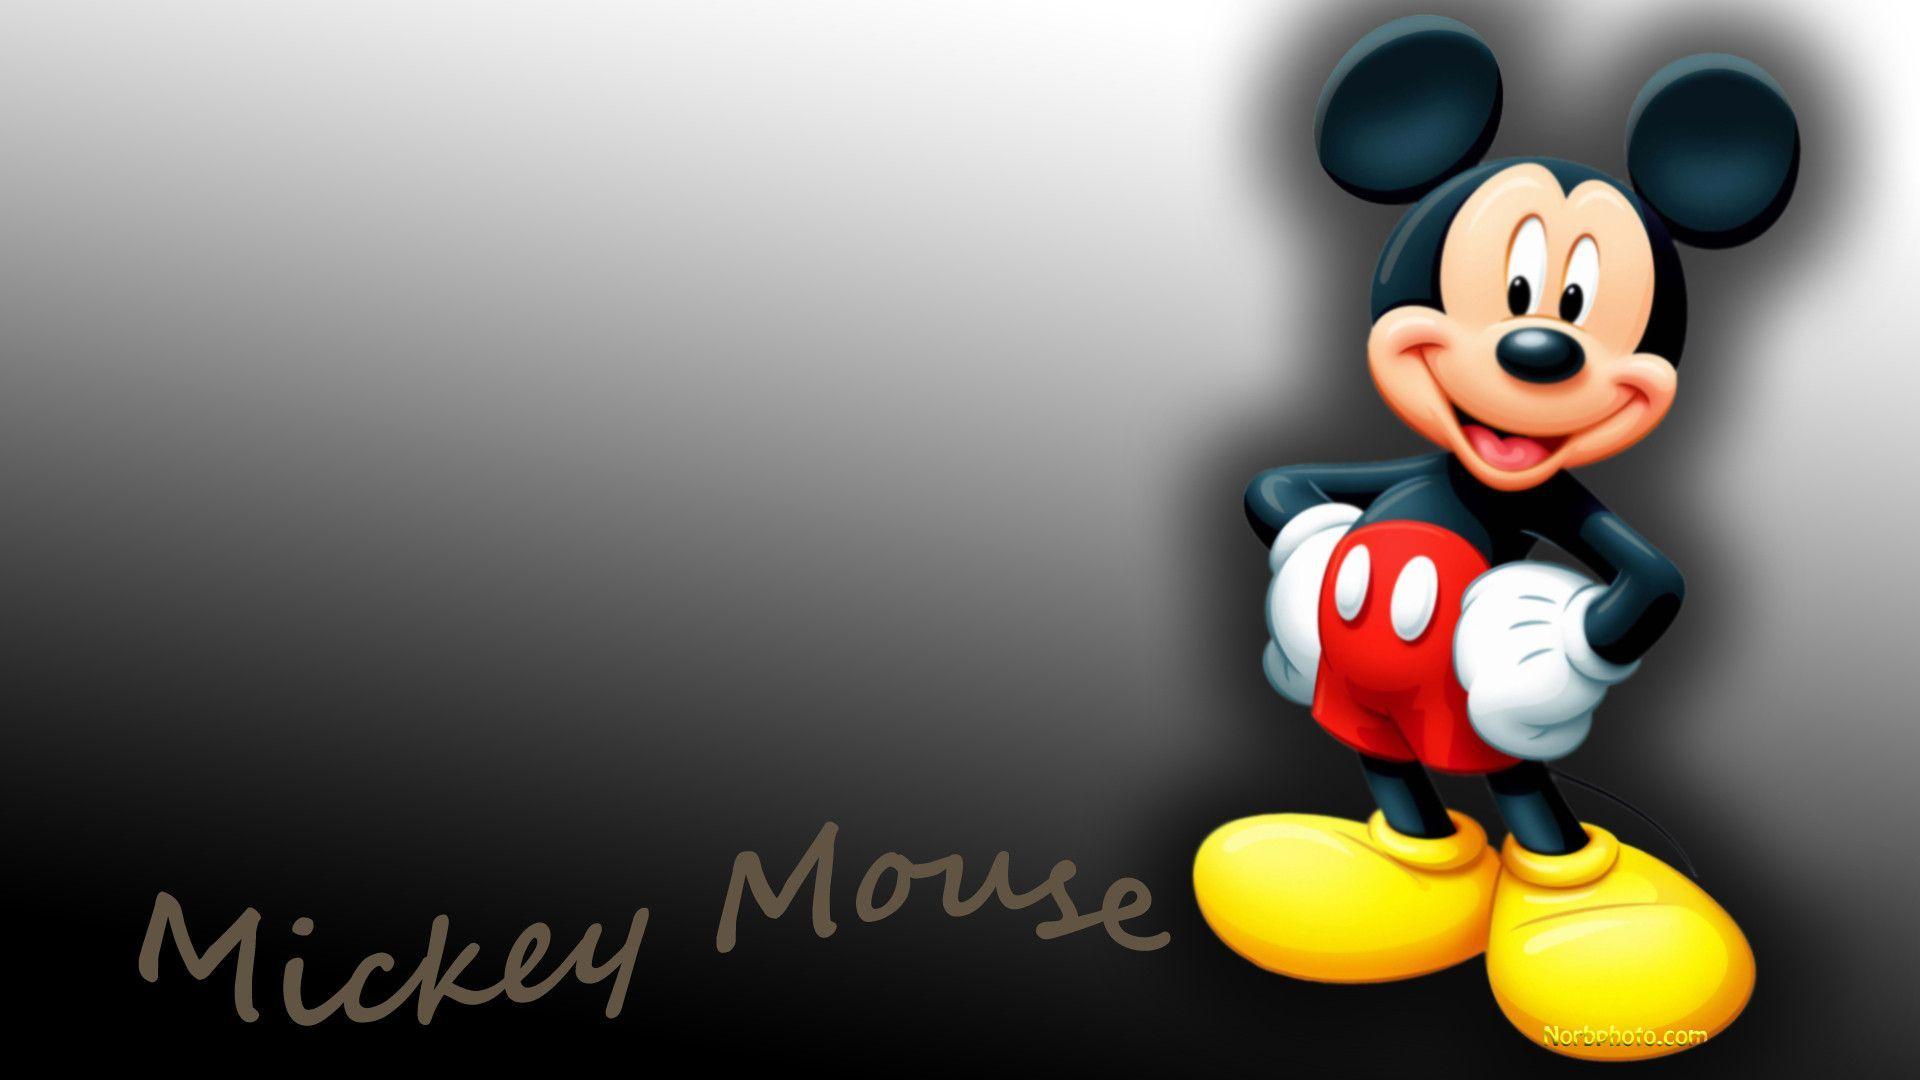 Download • Get in the spirit with Mickey Mouse Ears! Wallpaper